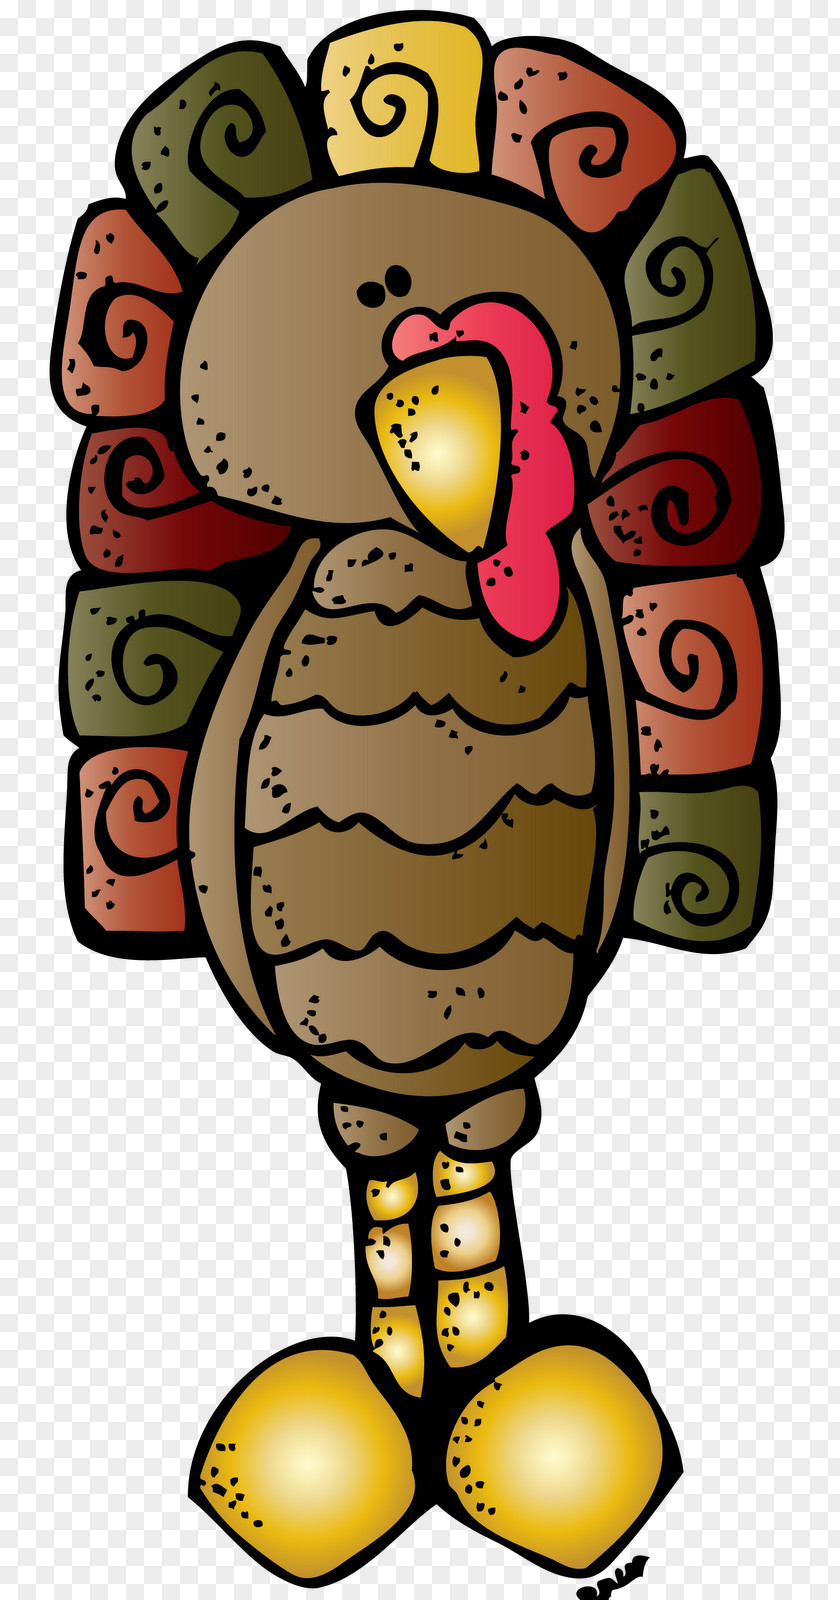 Thanksgiving Clip Art Activities Image Illustration PNG